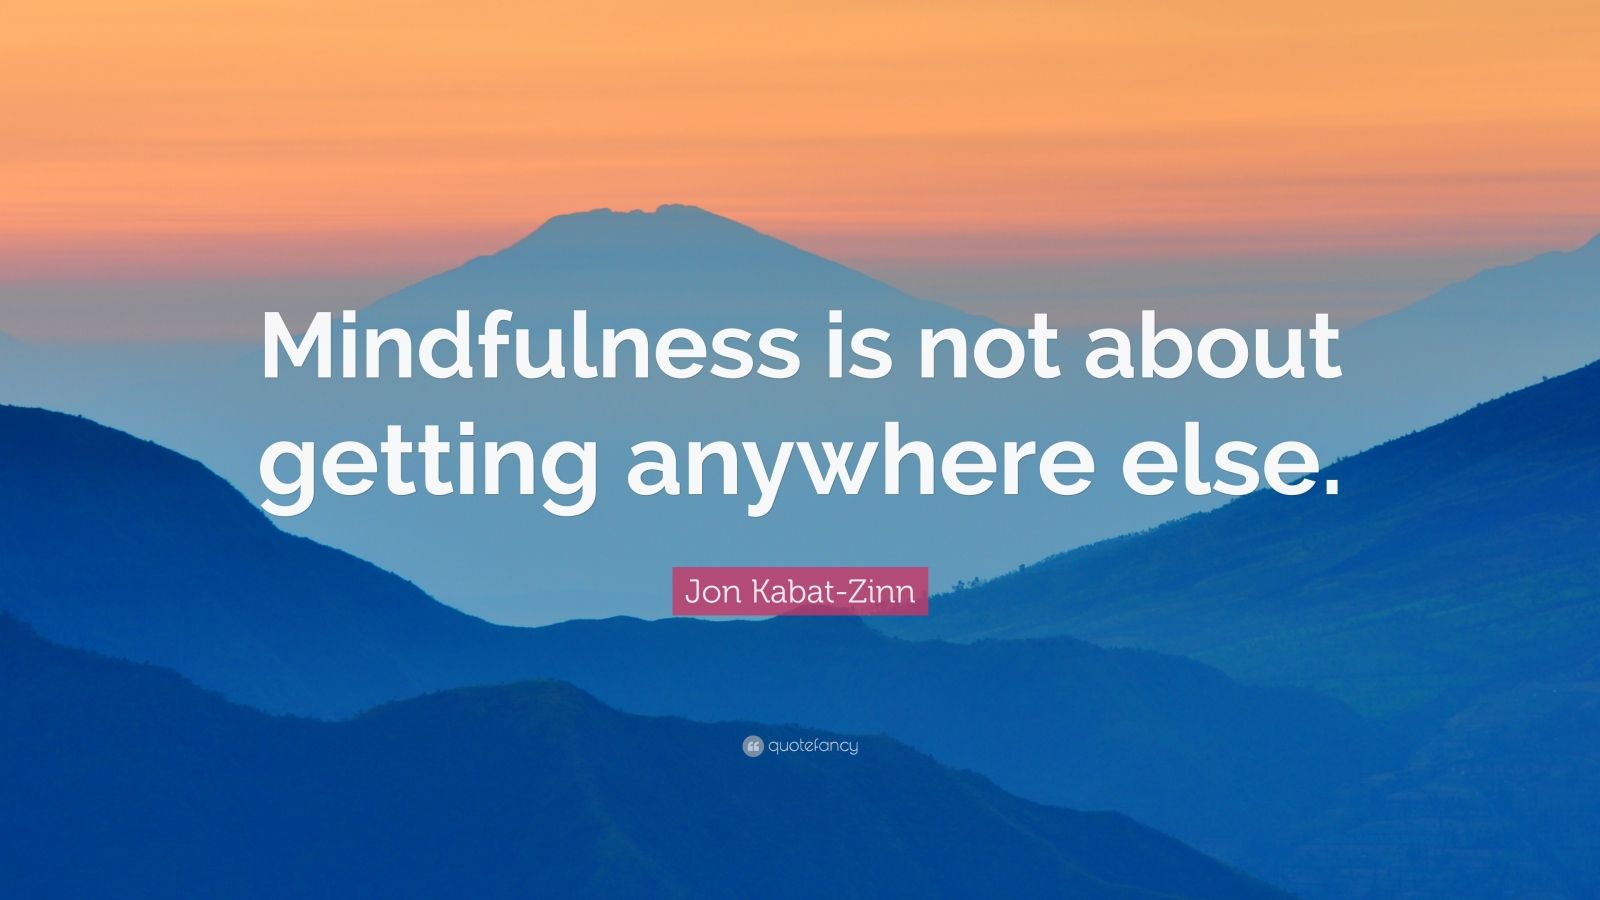 Jon Kabat-Zinn Quote: “Mindfulness is not about getting anywhere else ...